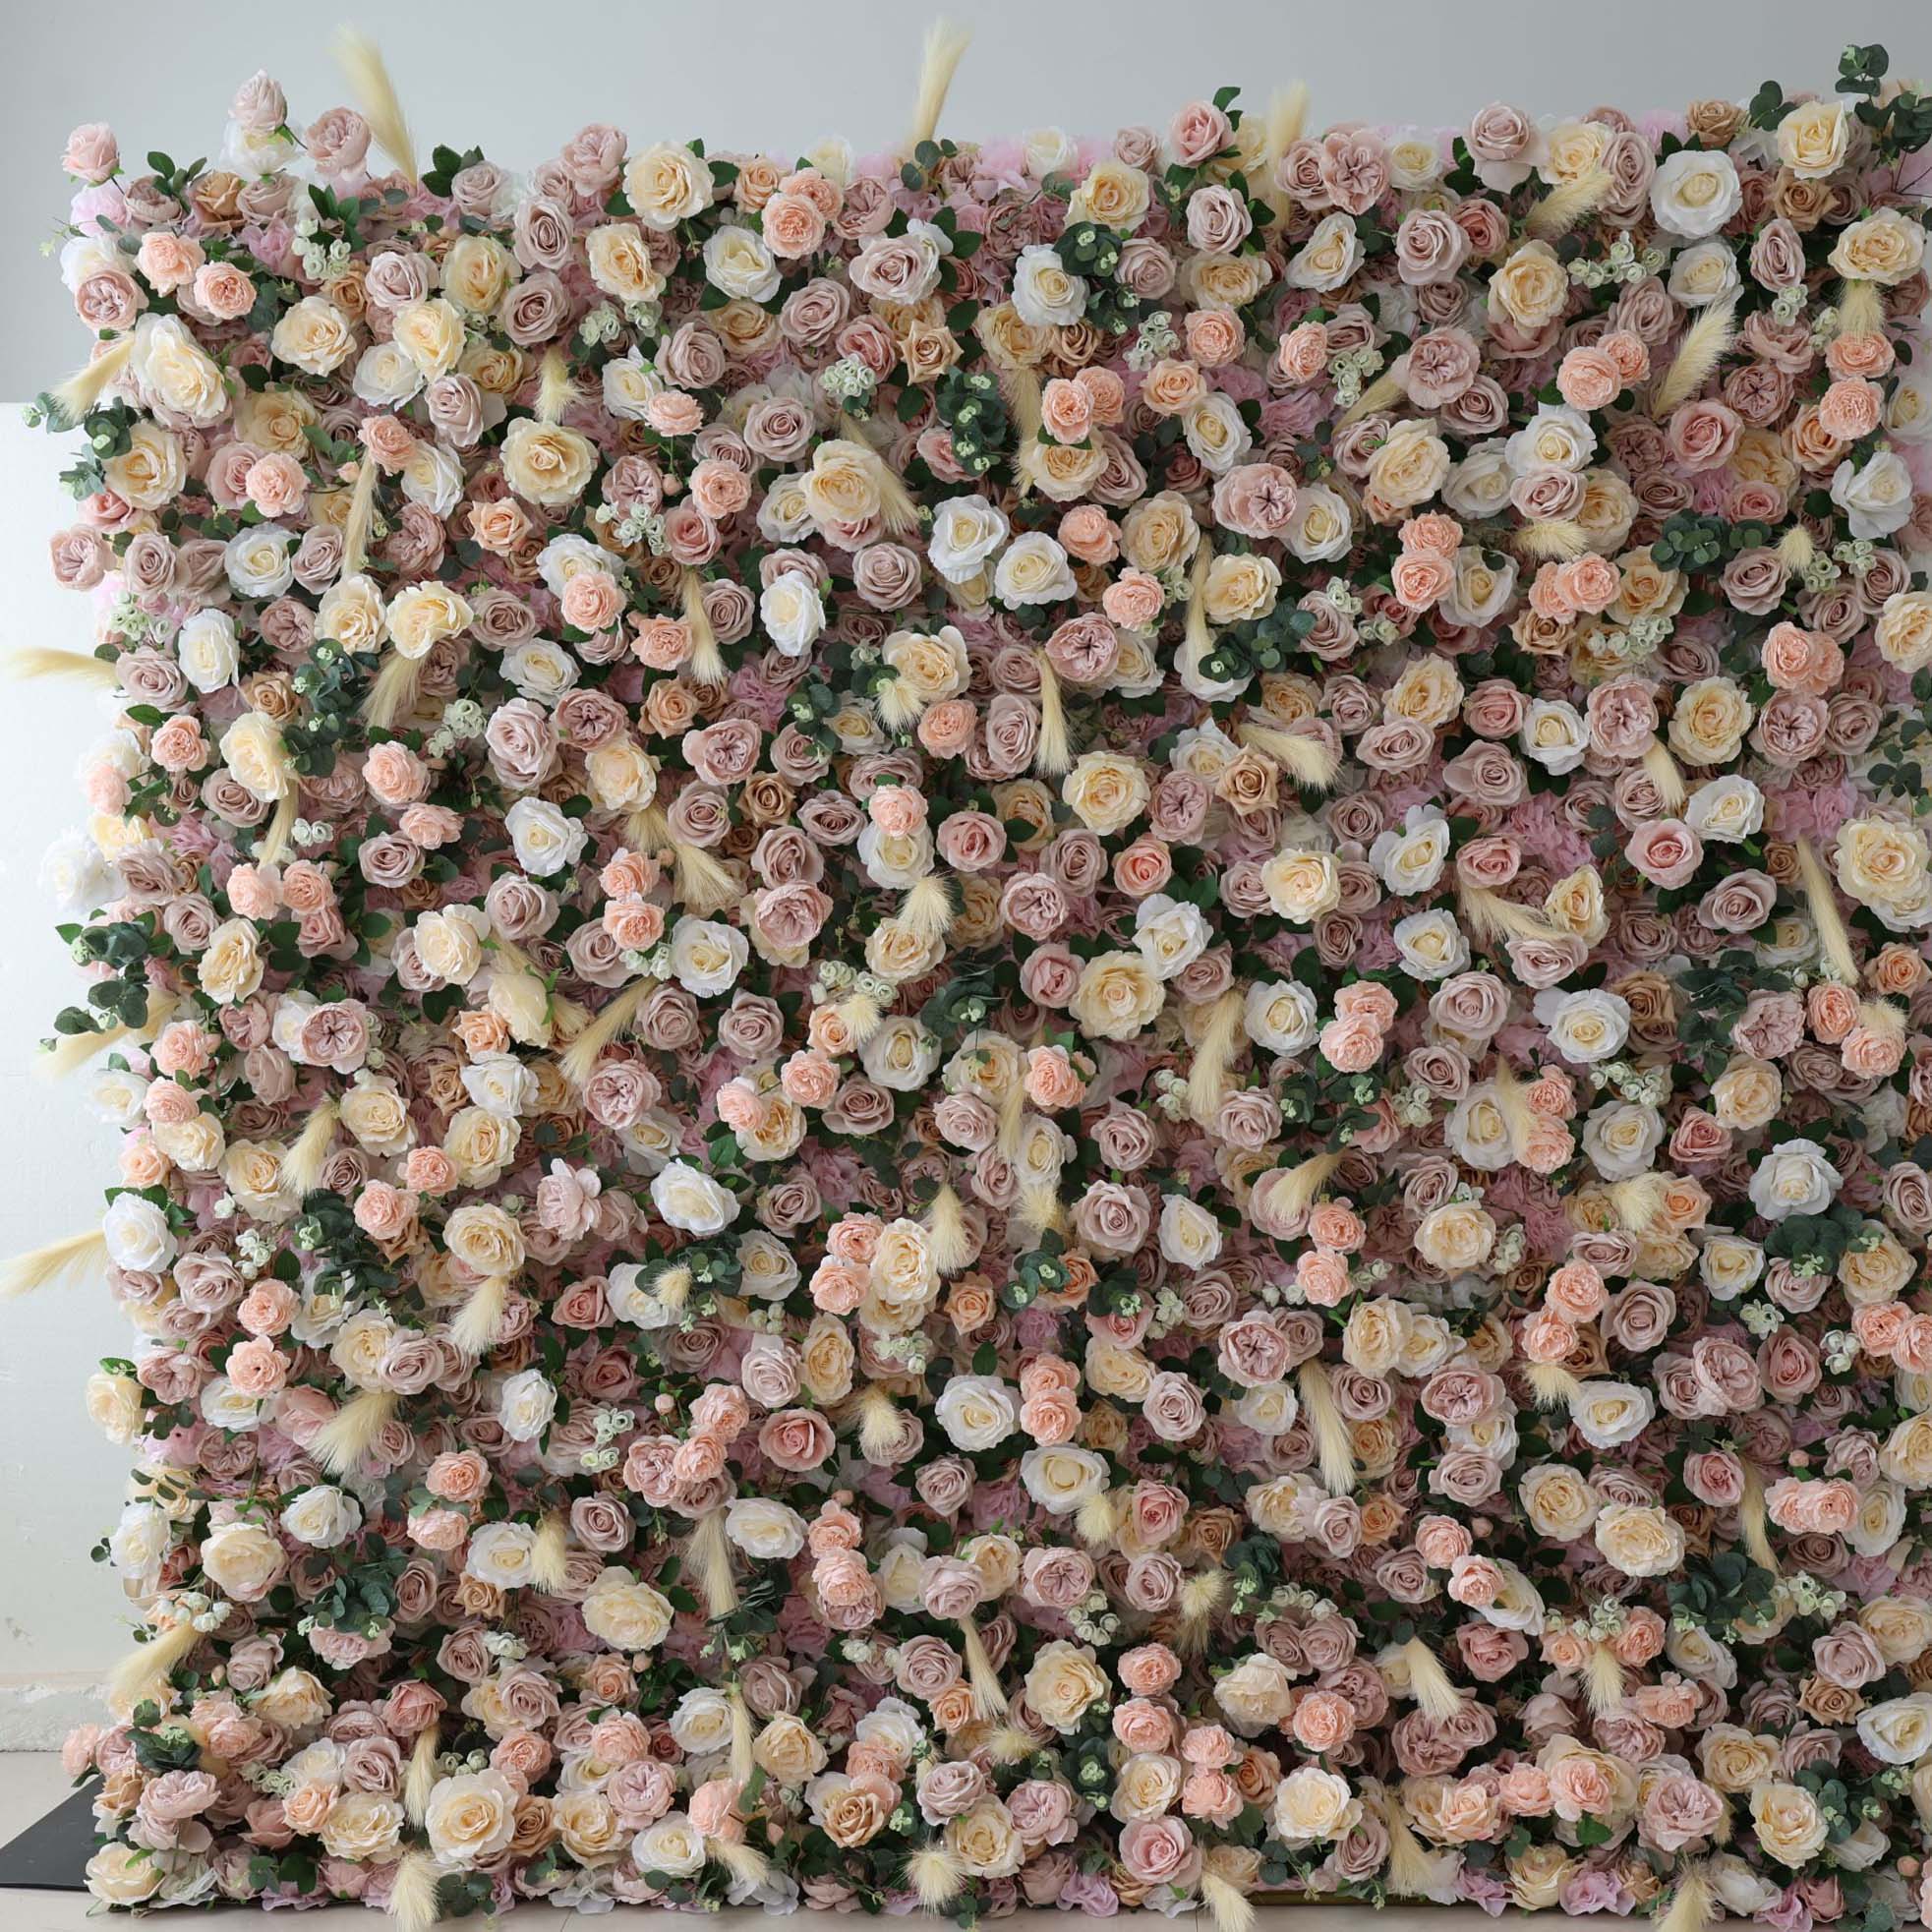 Valar Flowers Roll Up Fabric Artificial Flower Wall Wedding Backdrop, Floral Party Decor, Event Photography-VF-302